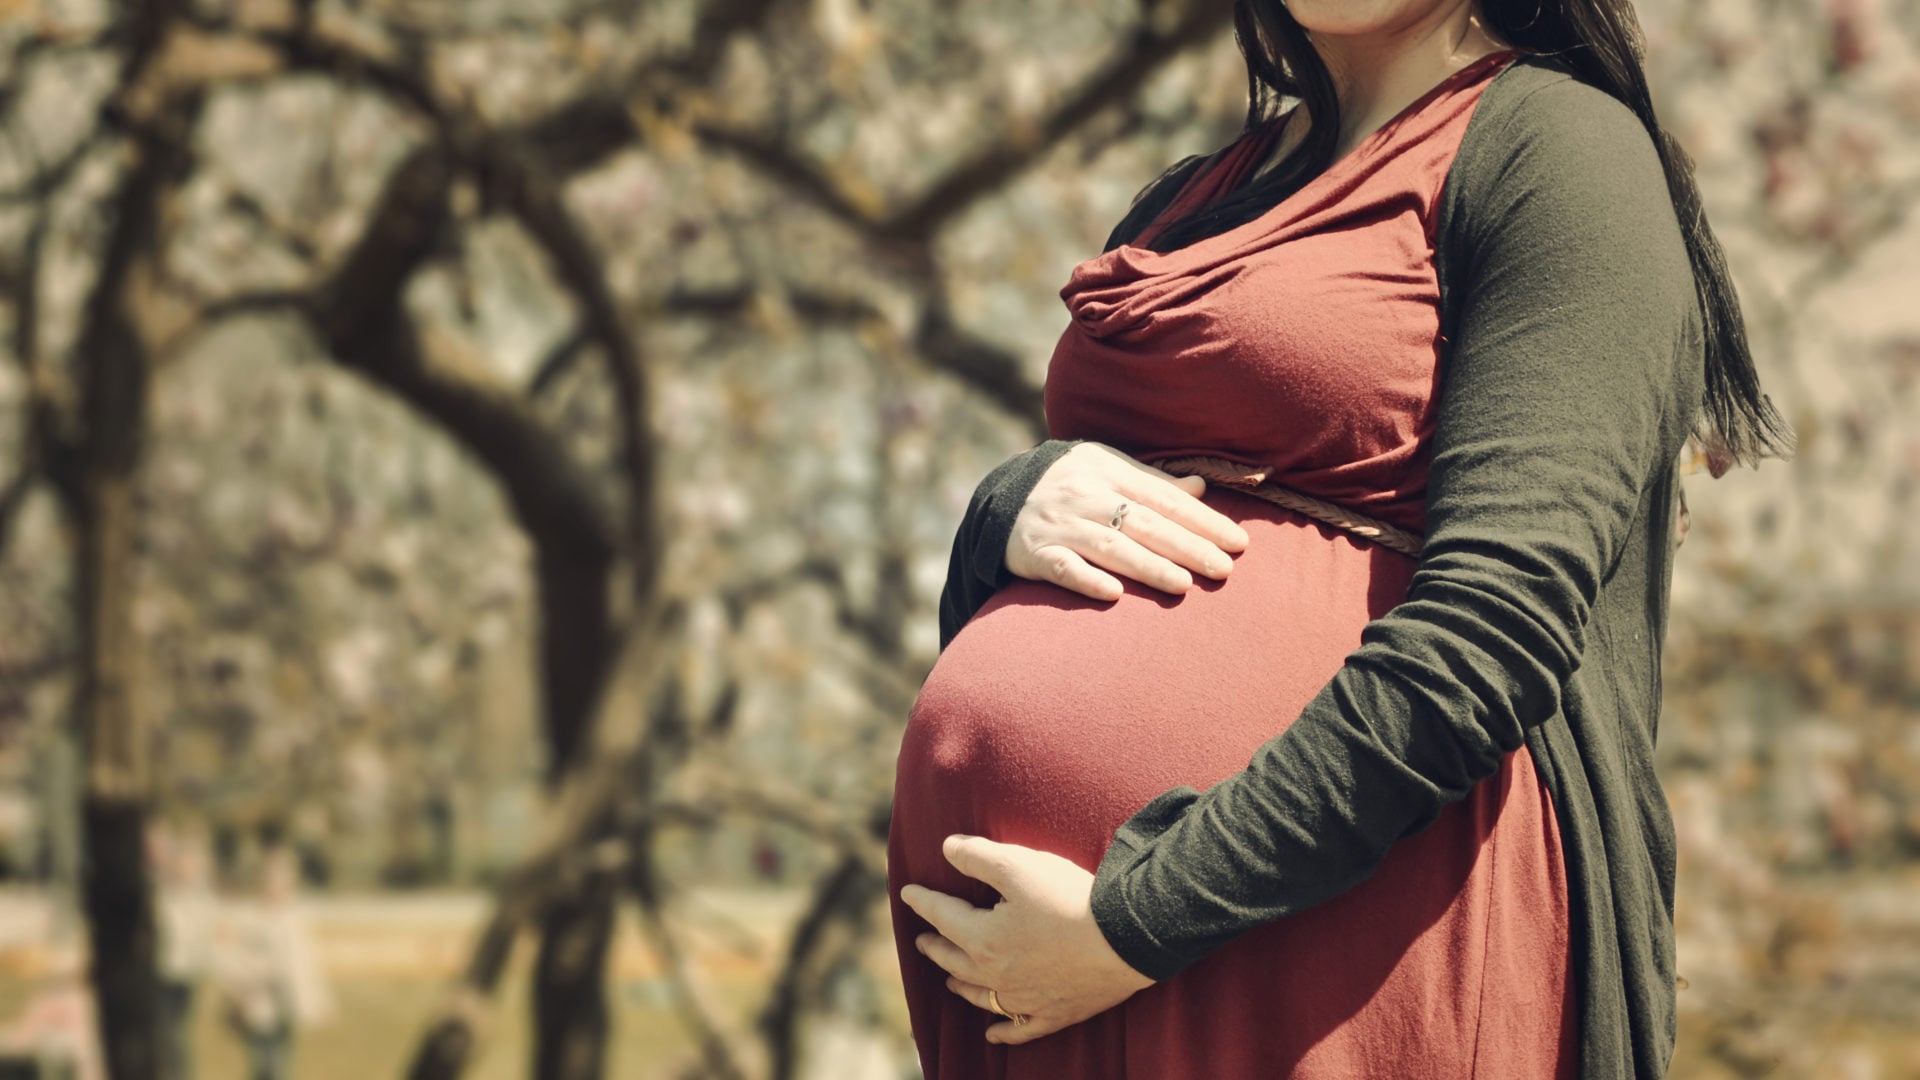 Would You Fund a Friend’s Maternity Leave?